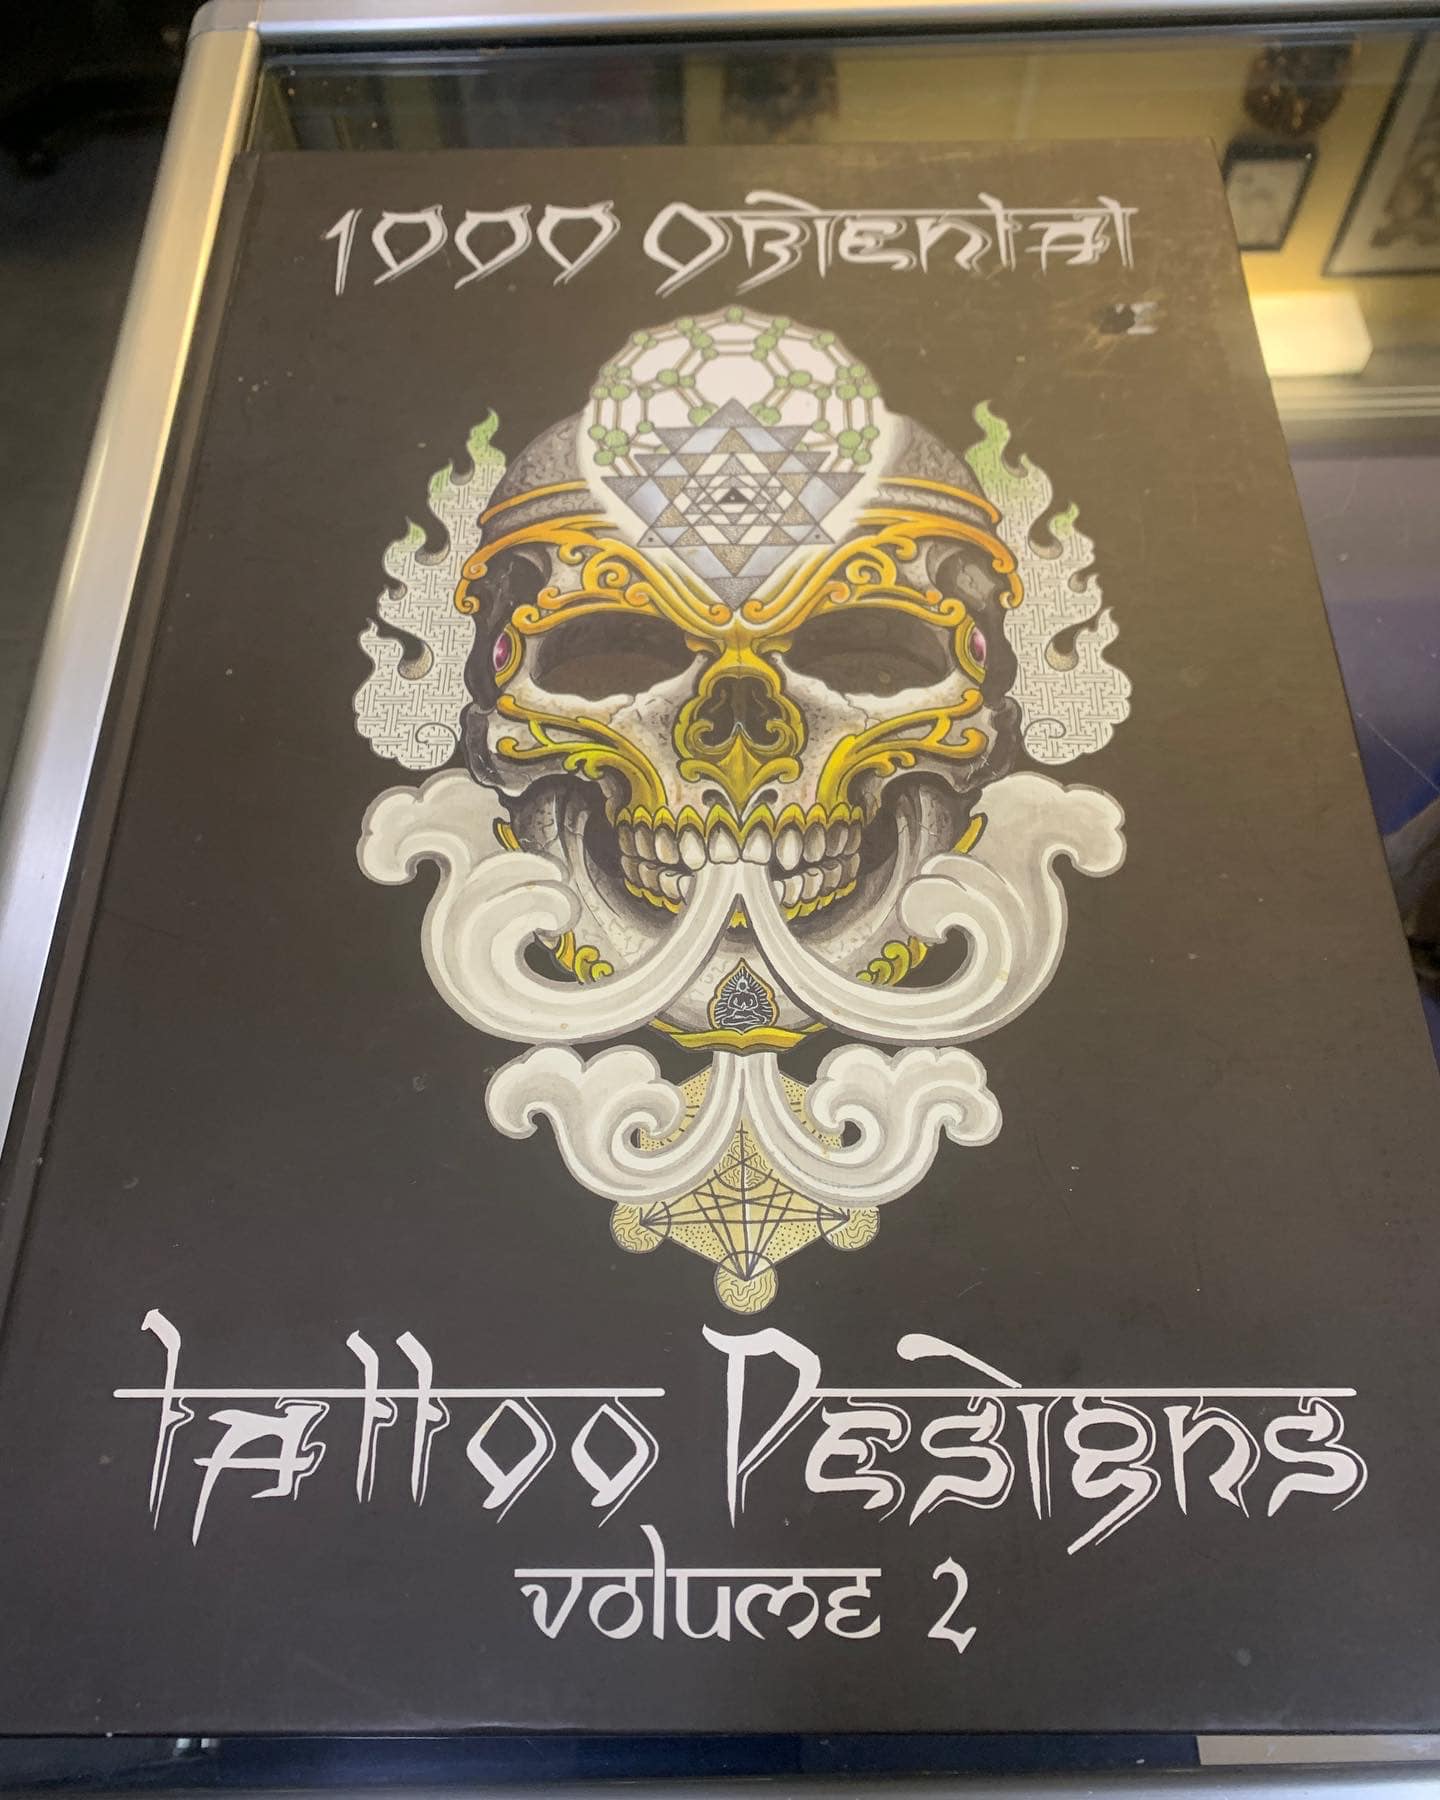 You are currently viewing 1000 Oriental Tattoo Designs